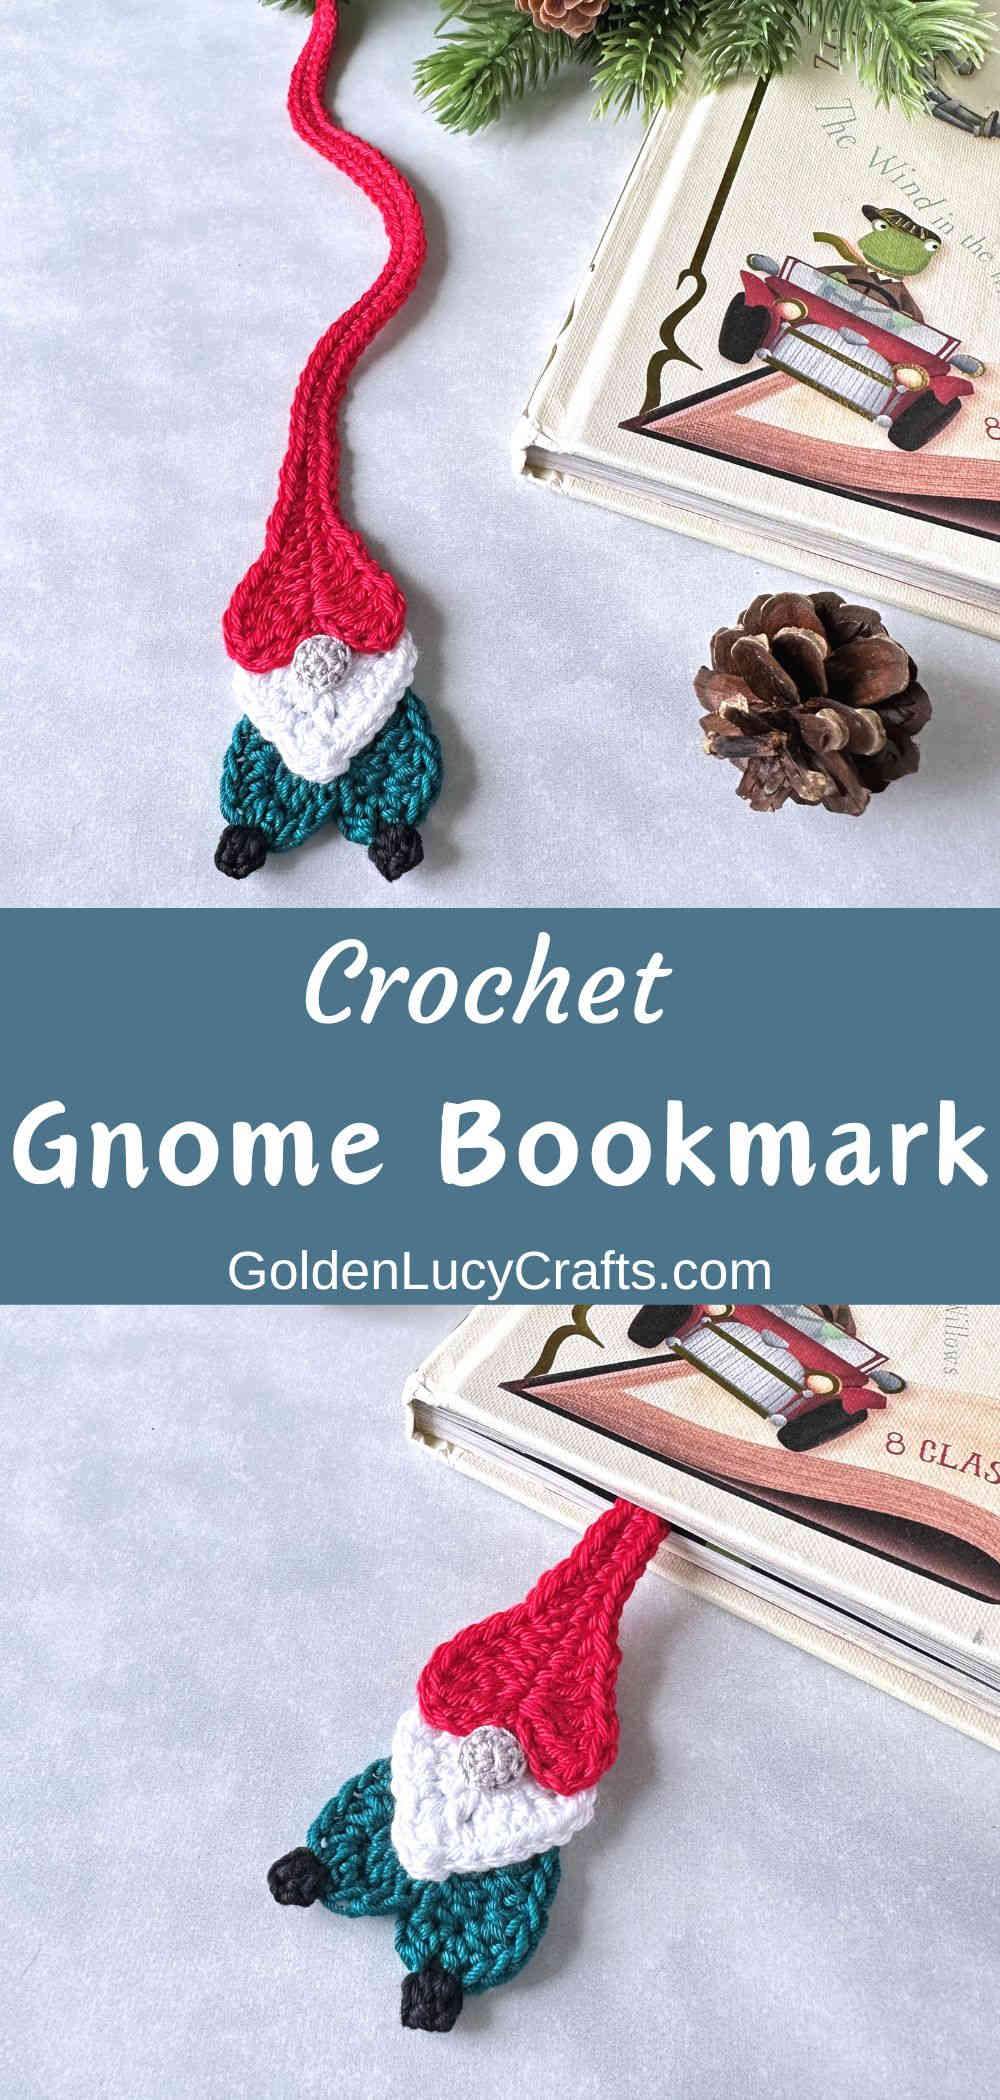 Crocheted Christmas gnome bookmark.